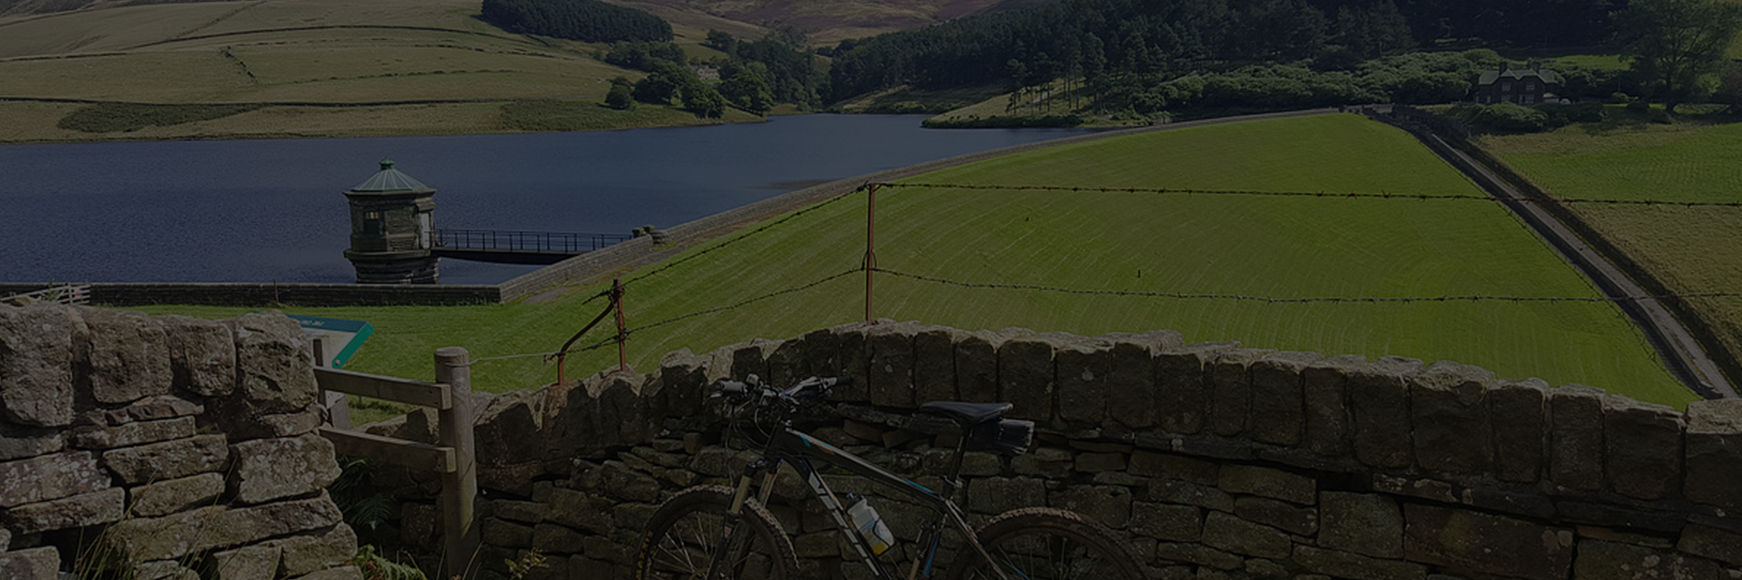 A day of mountain biking in the Peak District banner image